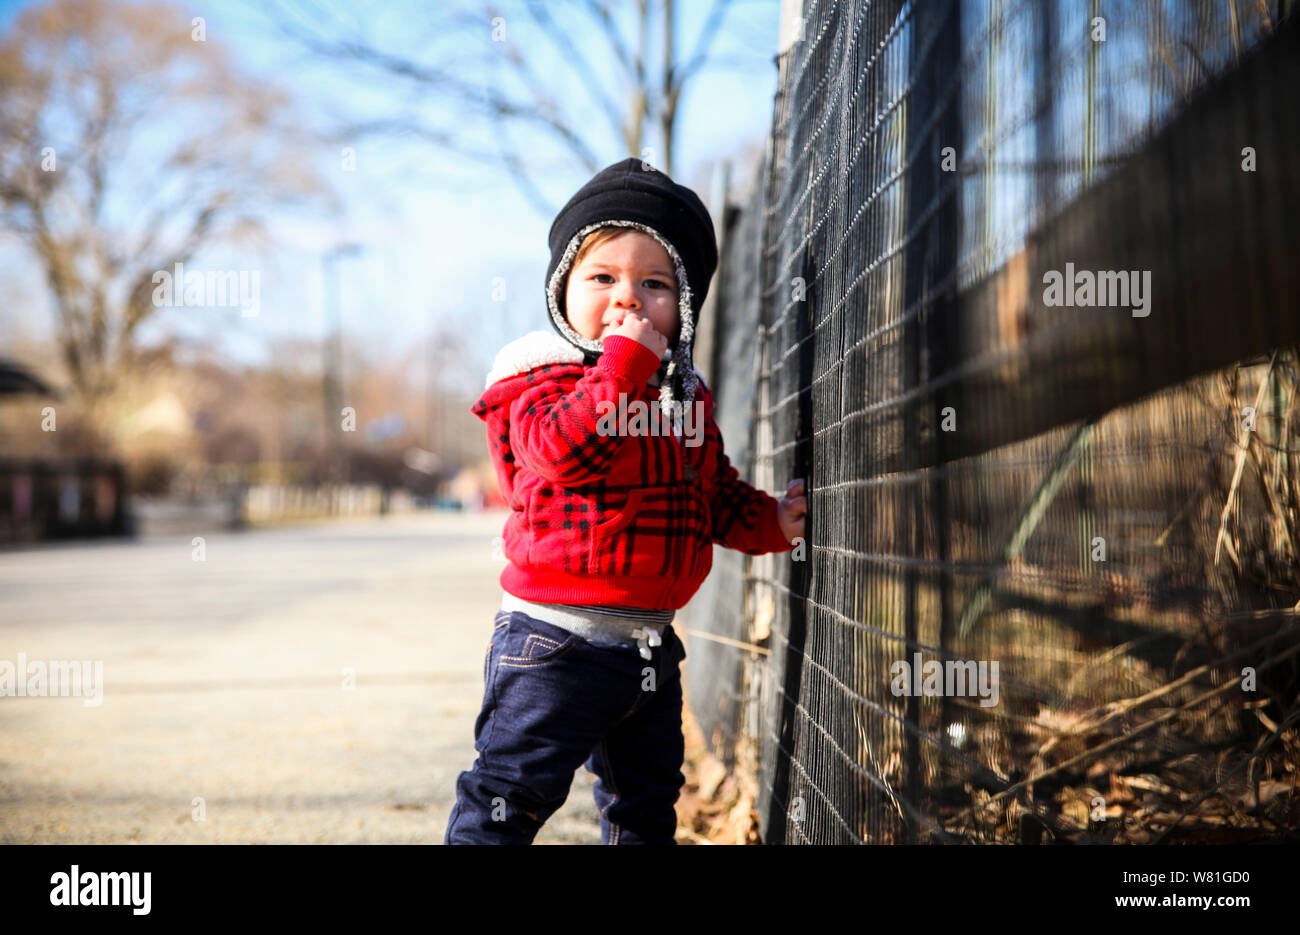 Three-Quarter Length Portrait of Young Boy Standing next to Fence Stock Photo